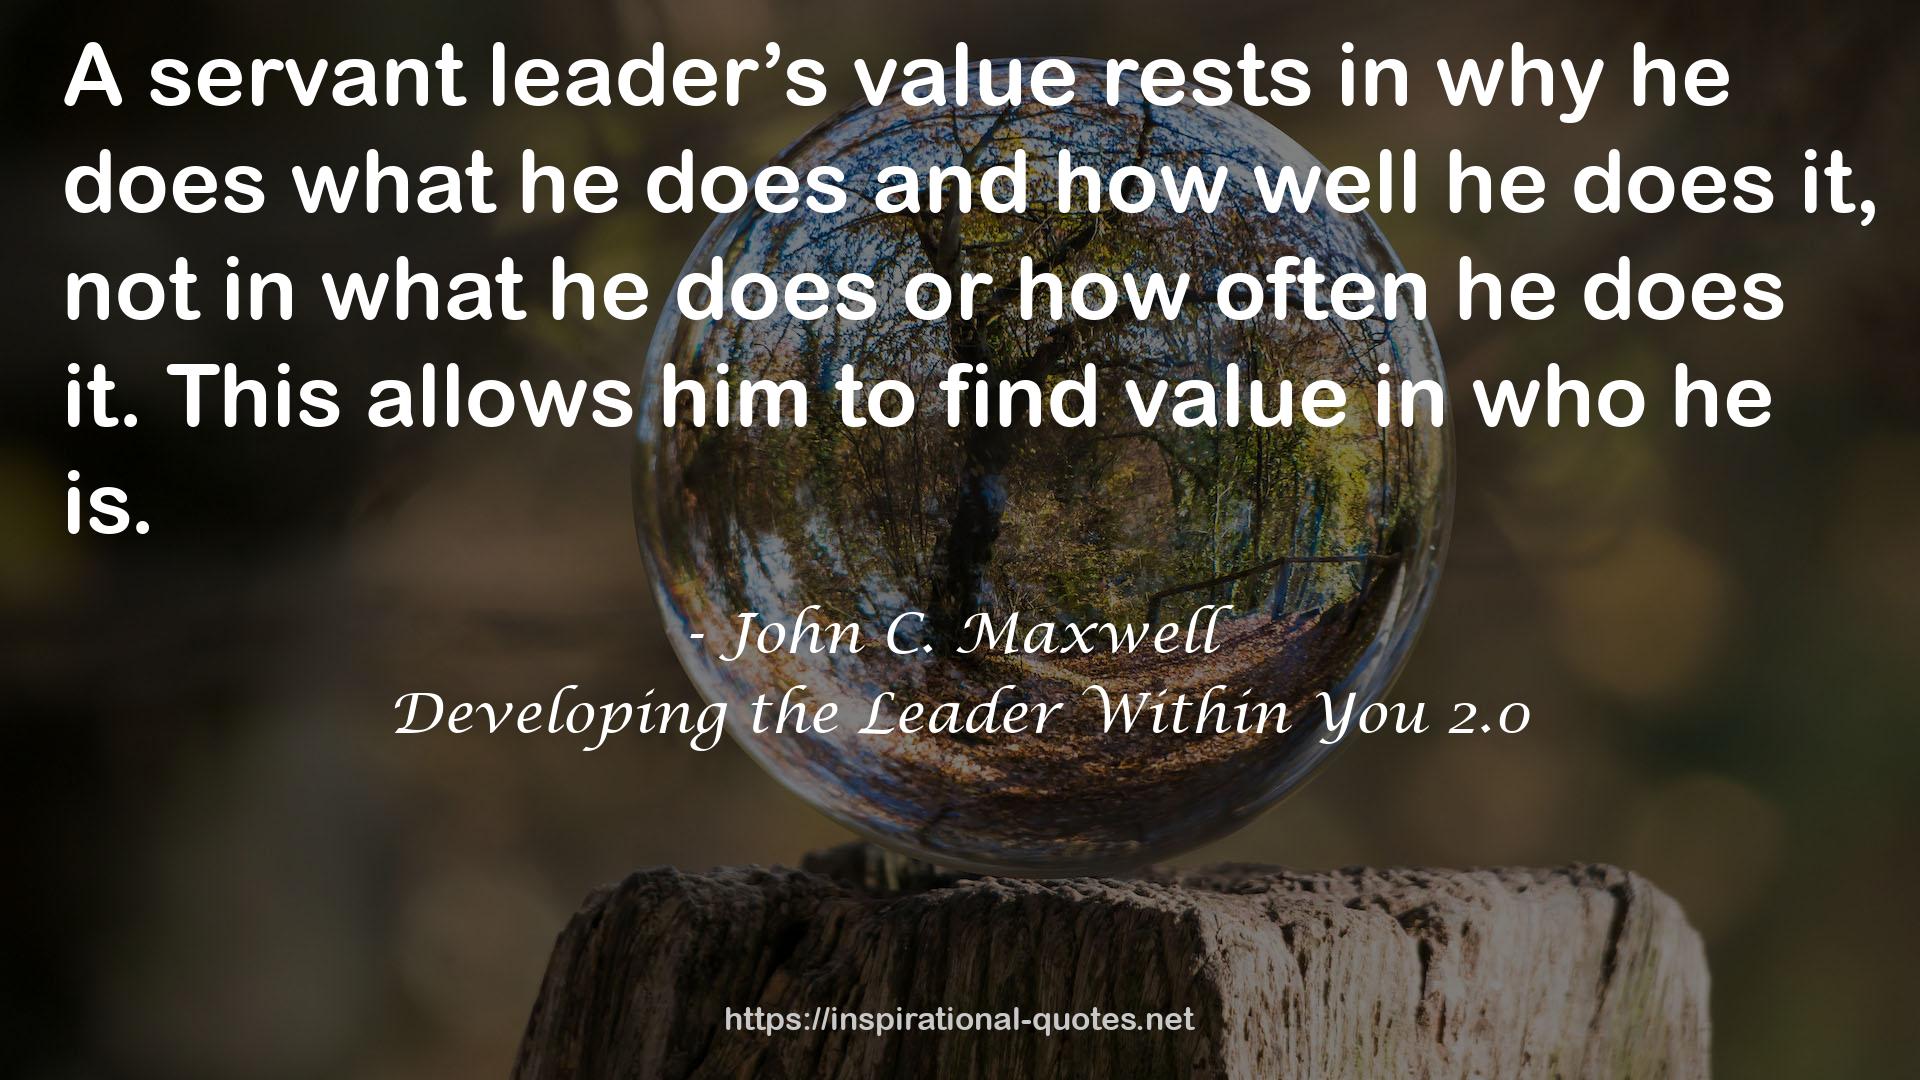 Developing the Leader Within You 2.0 QUOTES